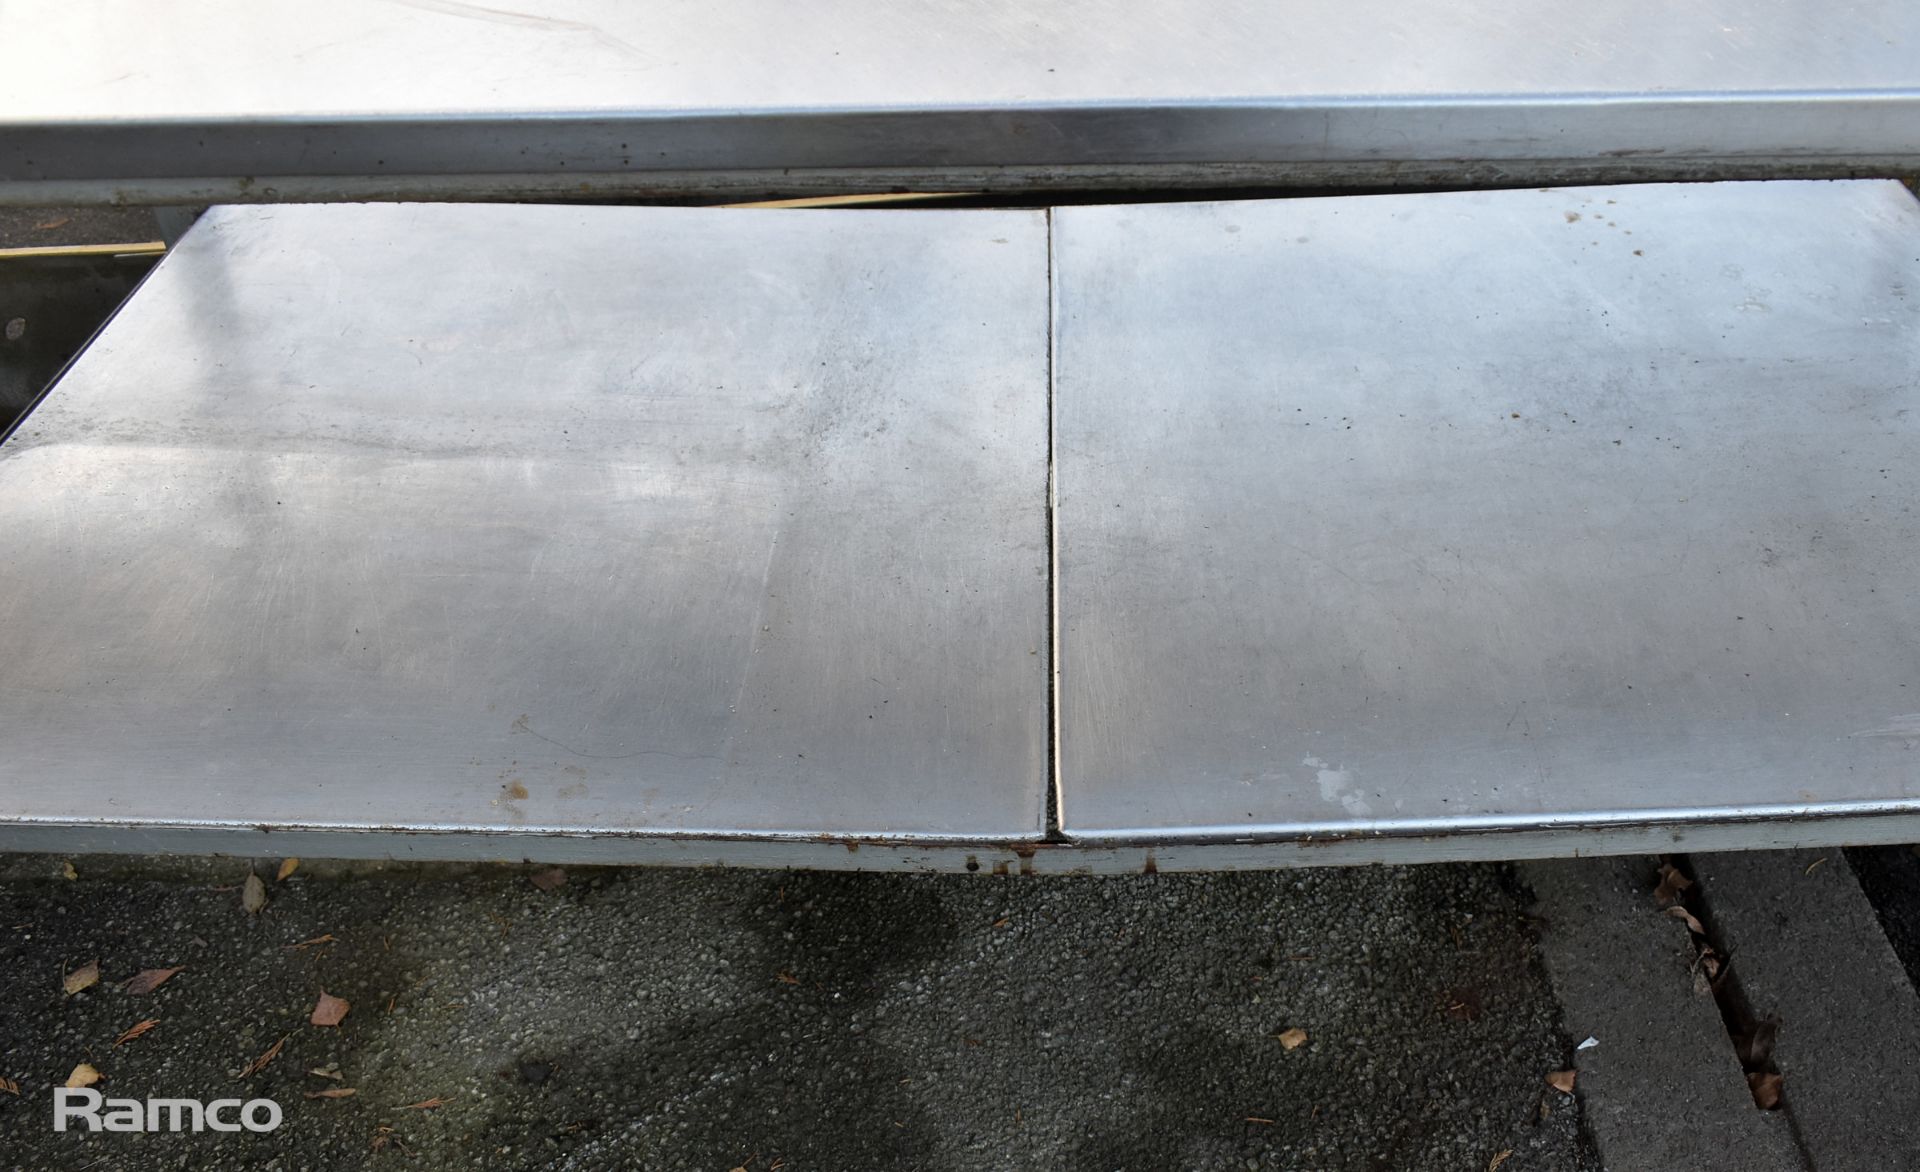 Stainless steel preparation table - L 1680 x W 870 x H 840mm - Image 3 of 3